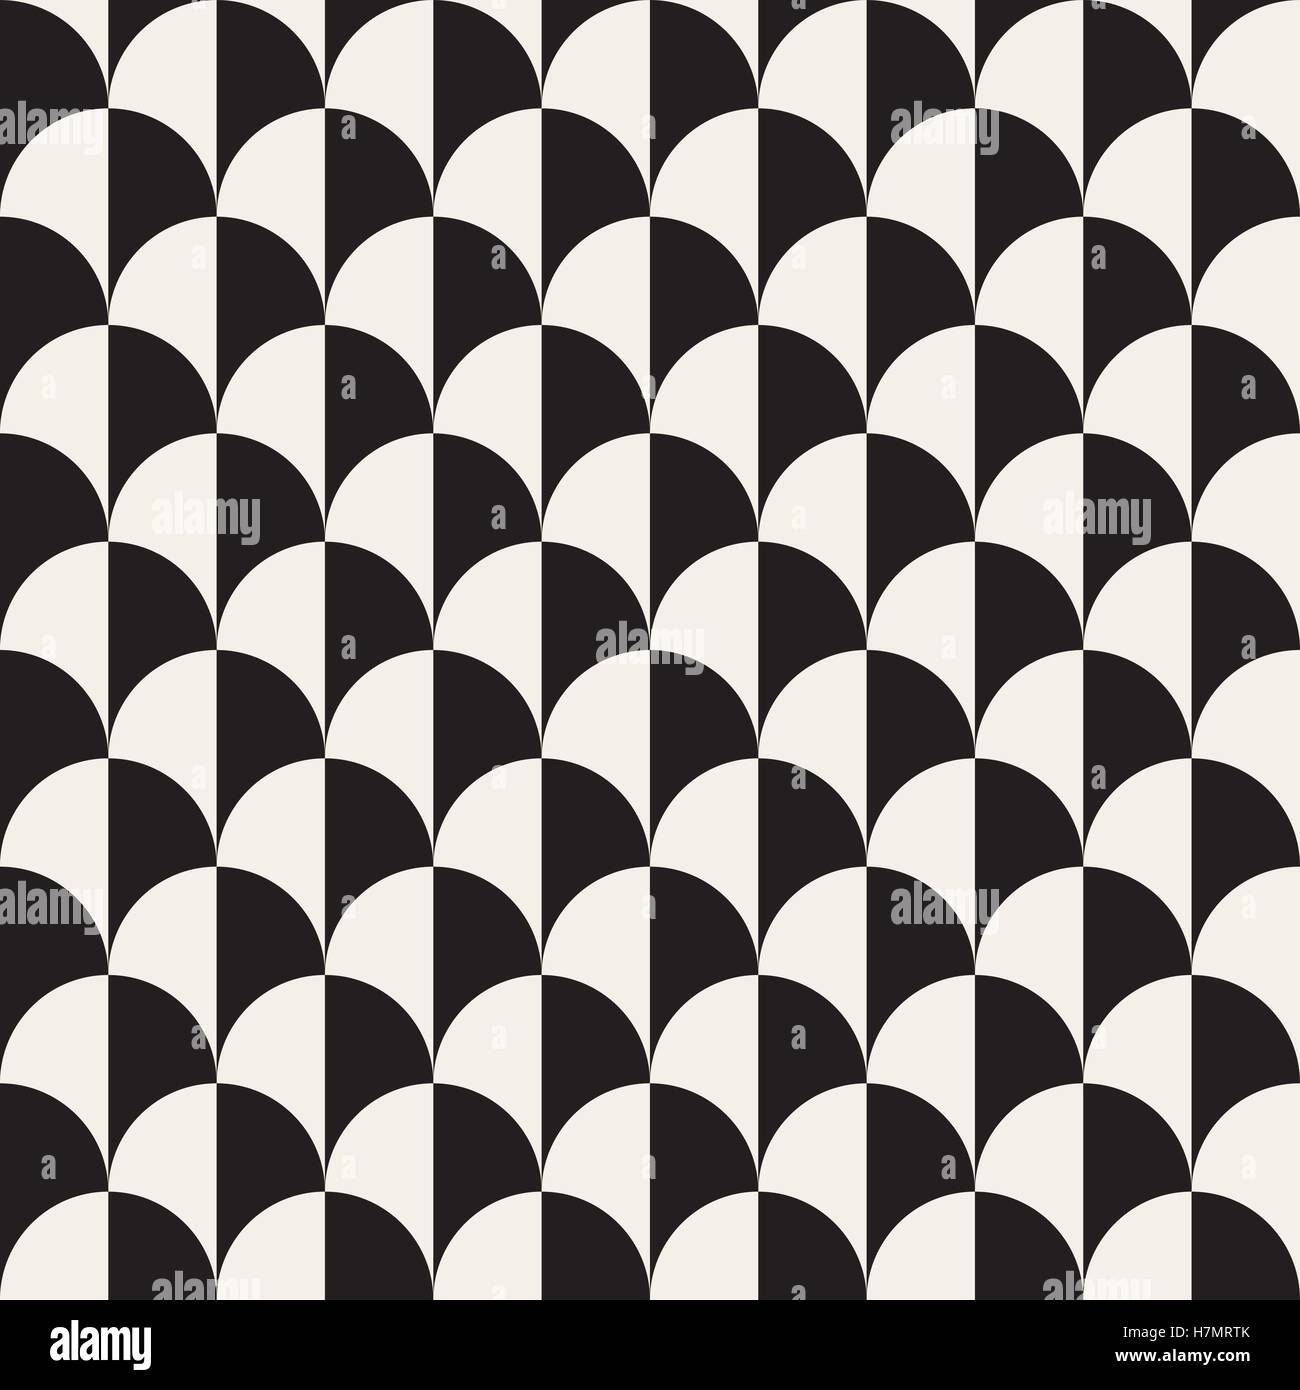 Vector Seamless Black And White Overlapping Semi Circle